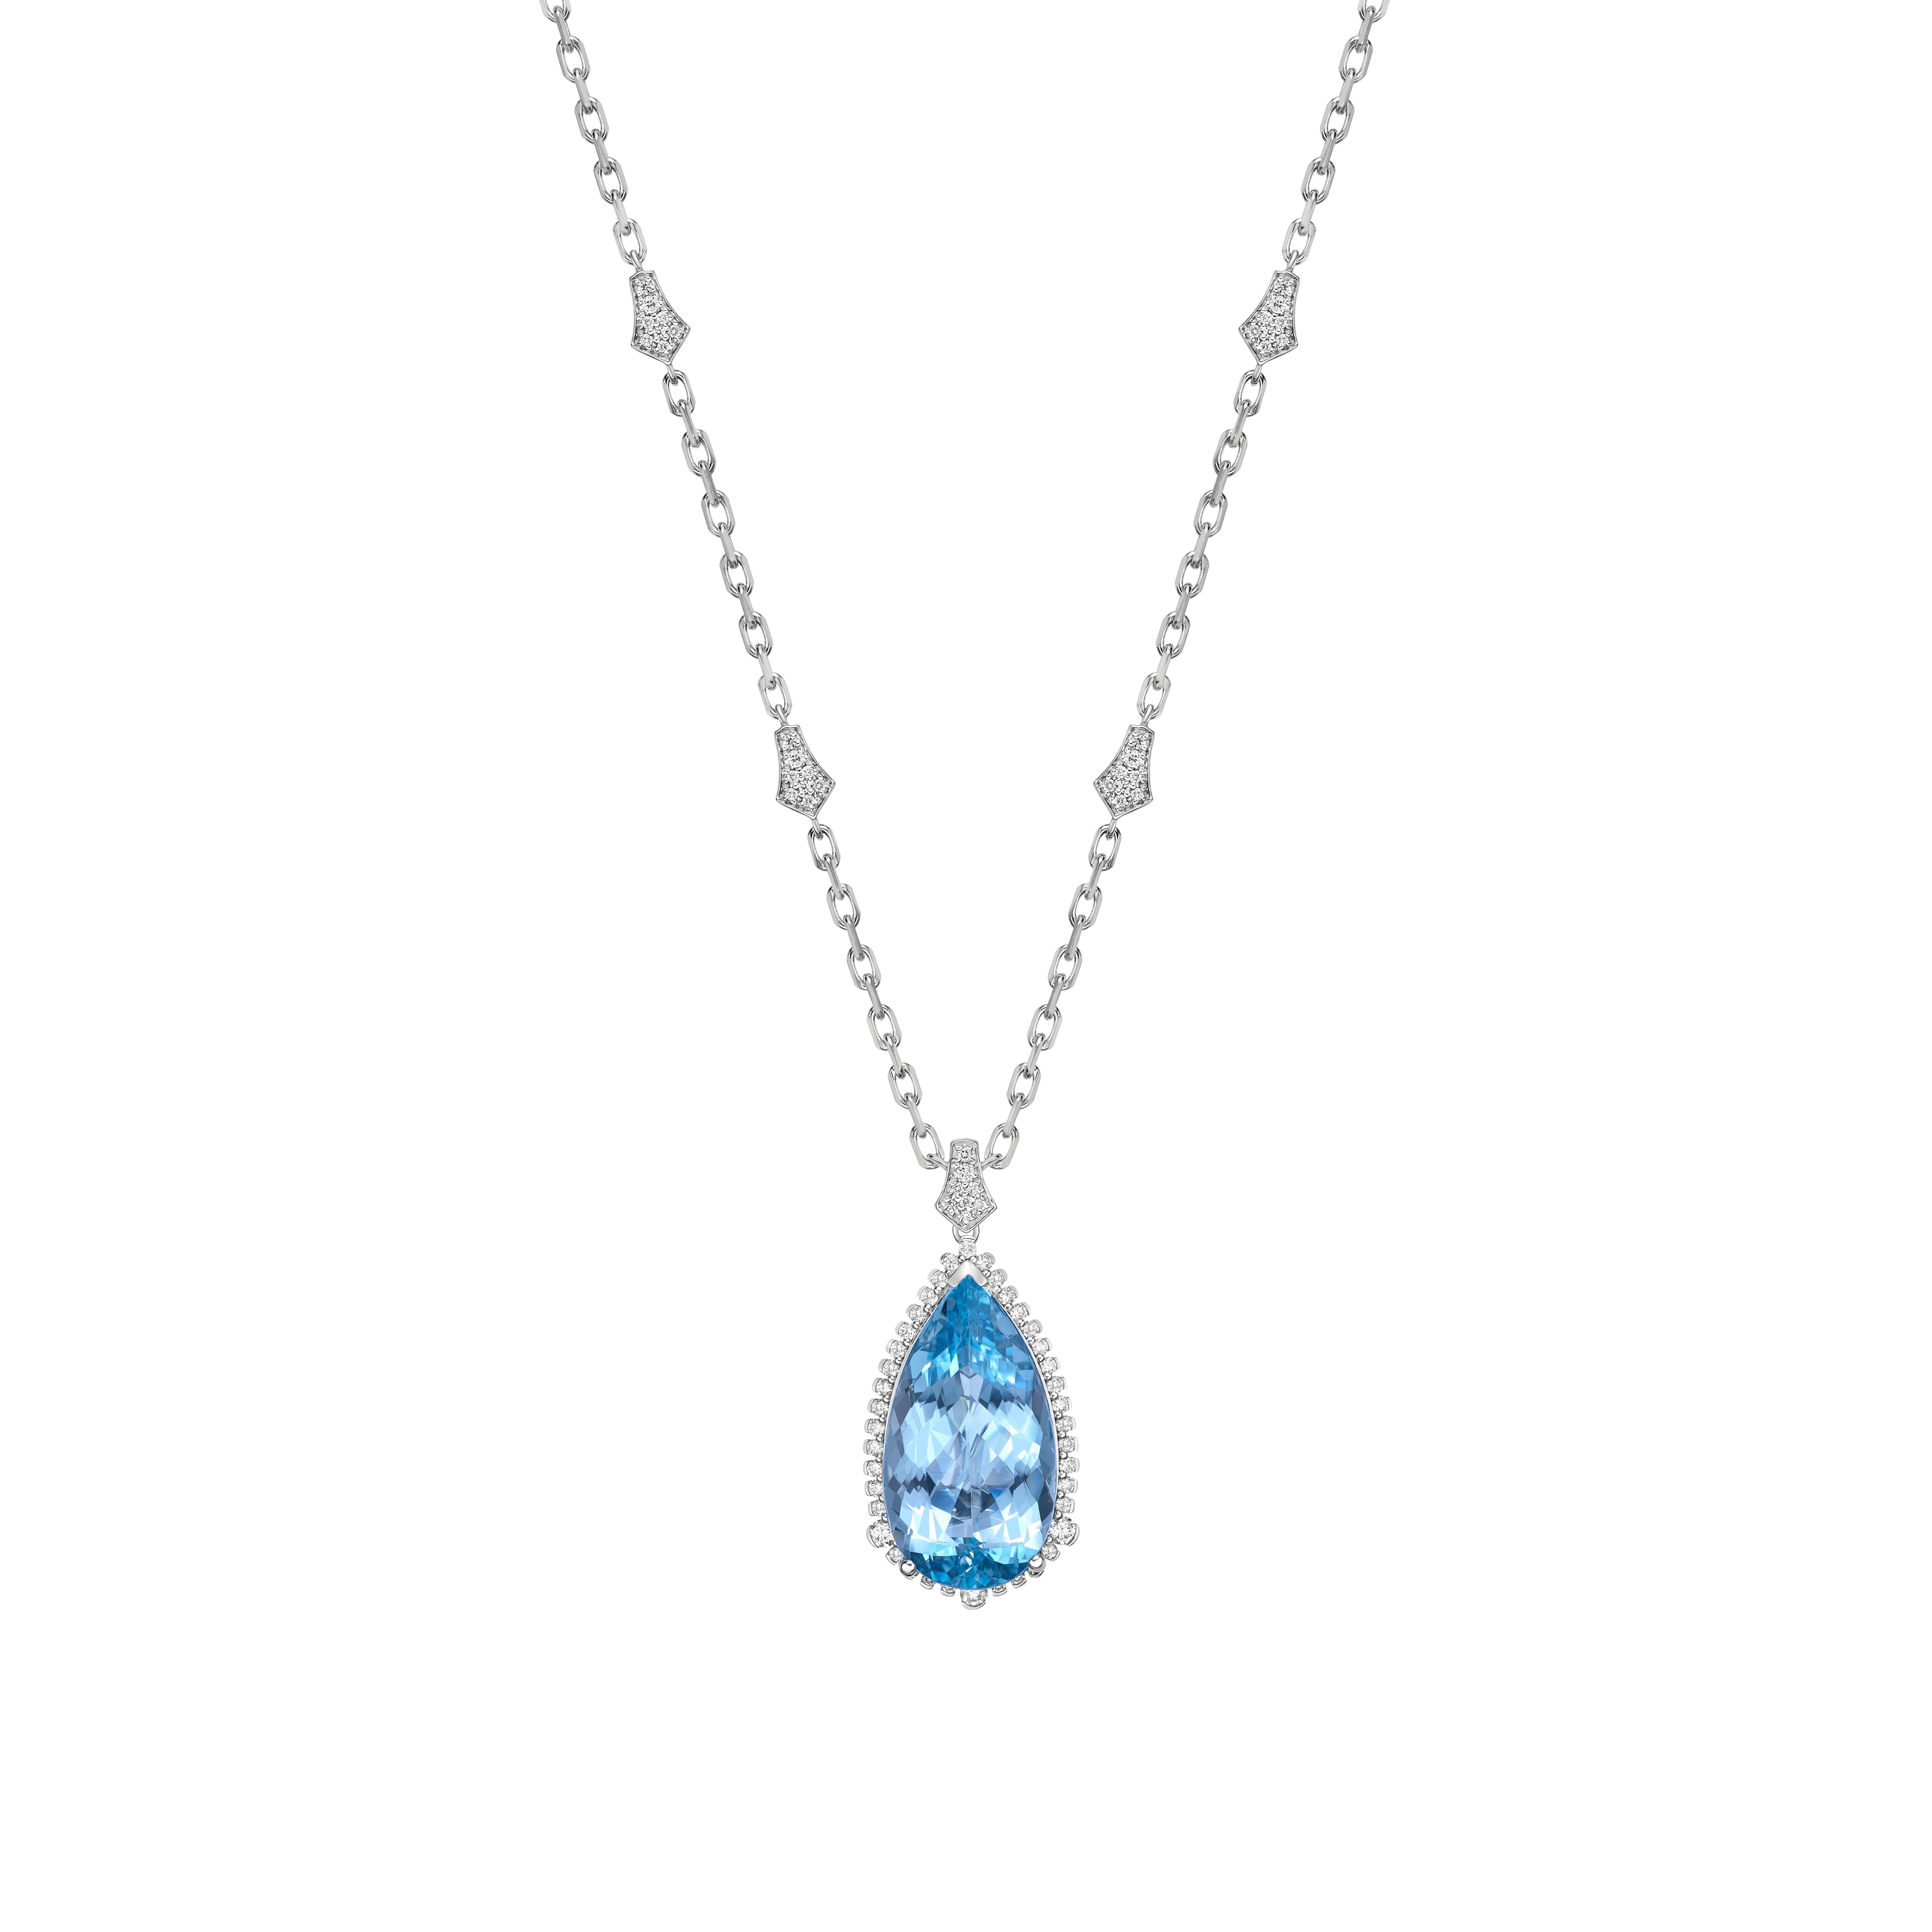 Elevate your look with our stunning Santa Maria aquamarine Set, featuring a mesmerizing ice blue hue that radiates elegance. Enhanced with diamonds and crafted in white gold, this necklace/pendant offers a timeless allure with a touch of modern